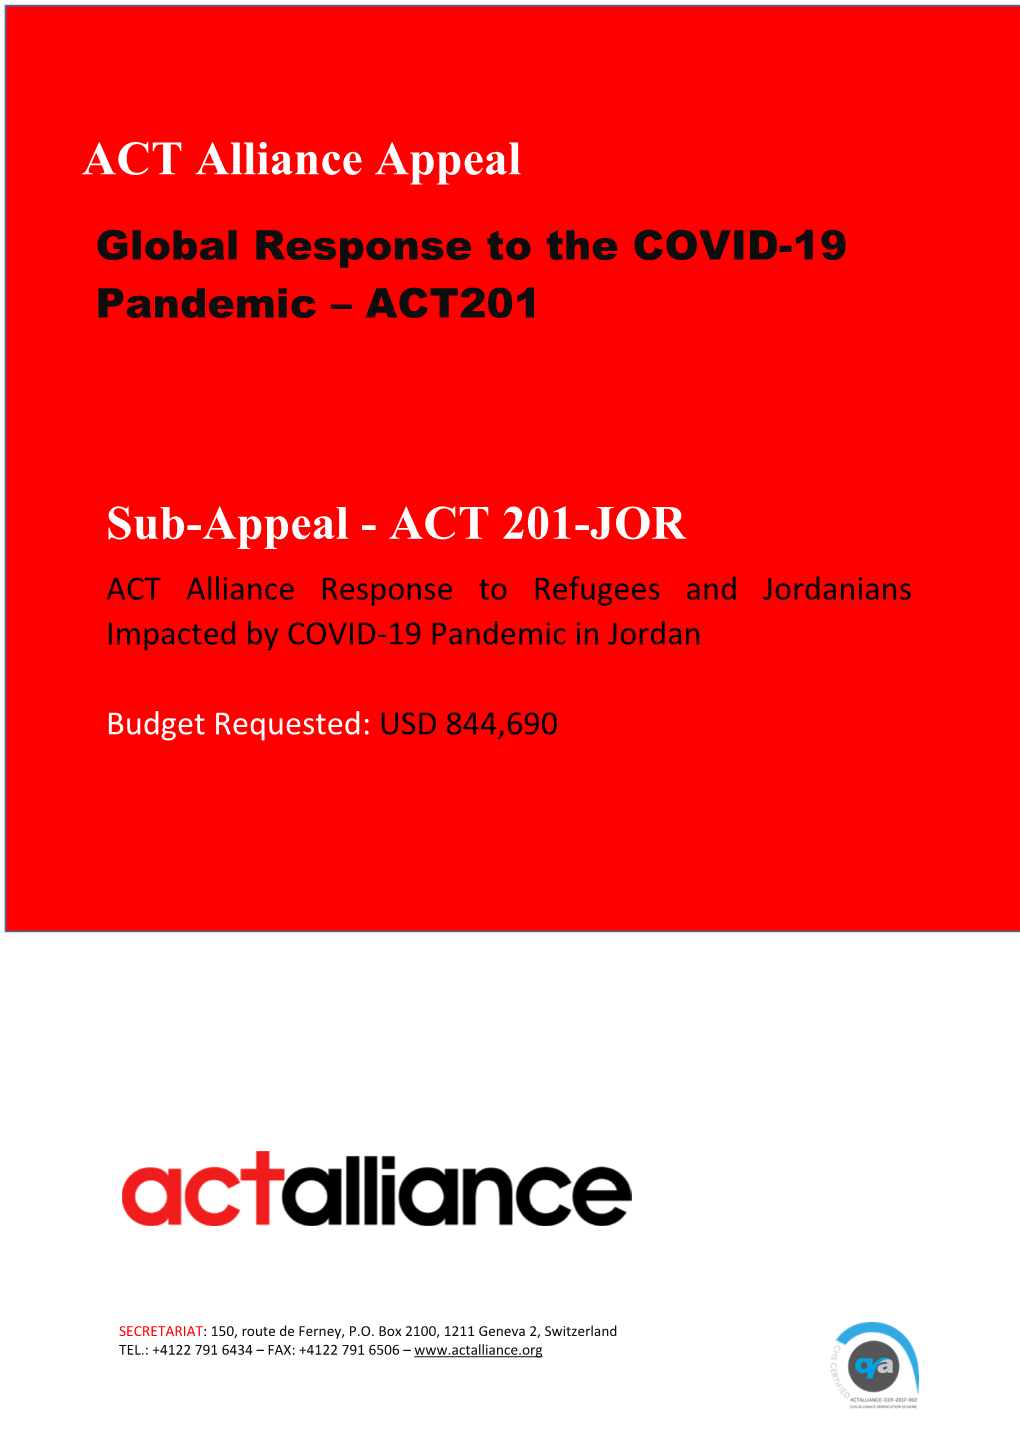 ACT Alliance Appeal